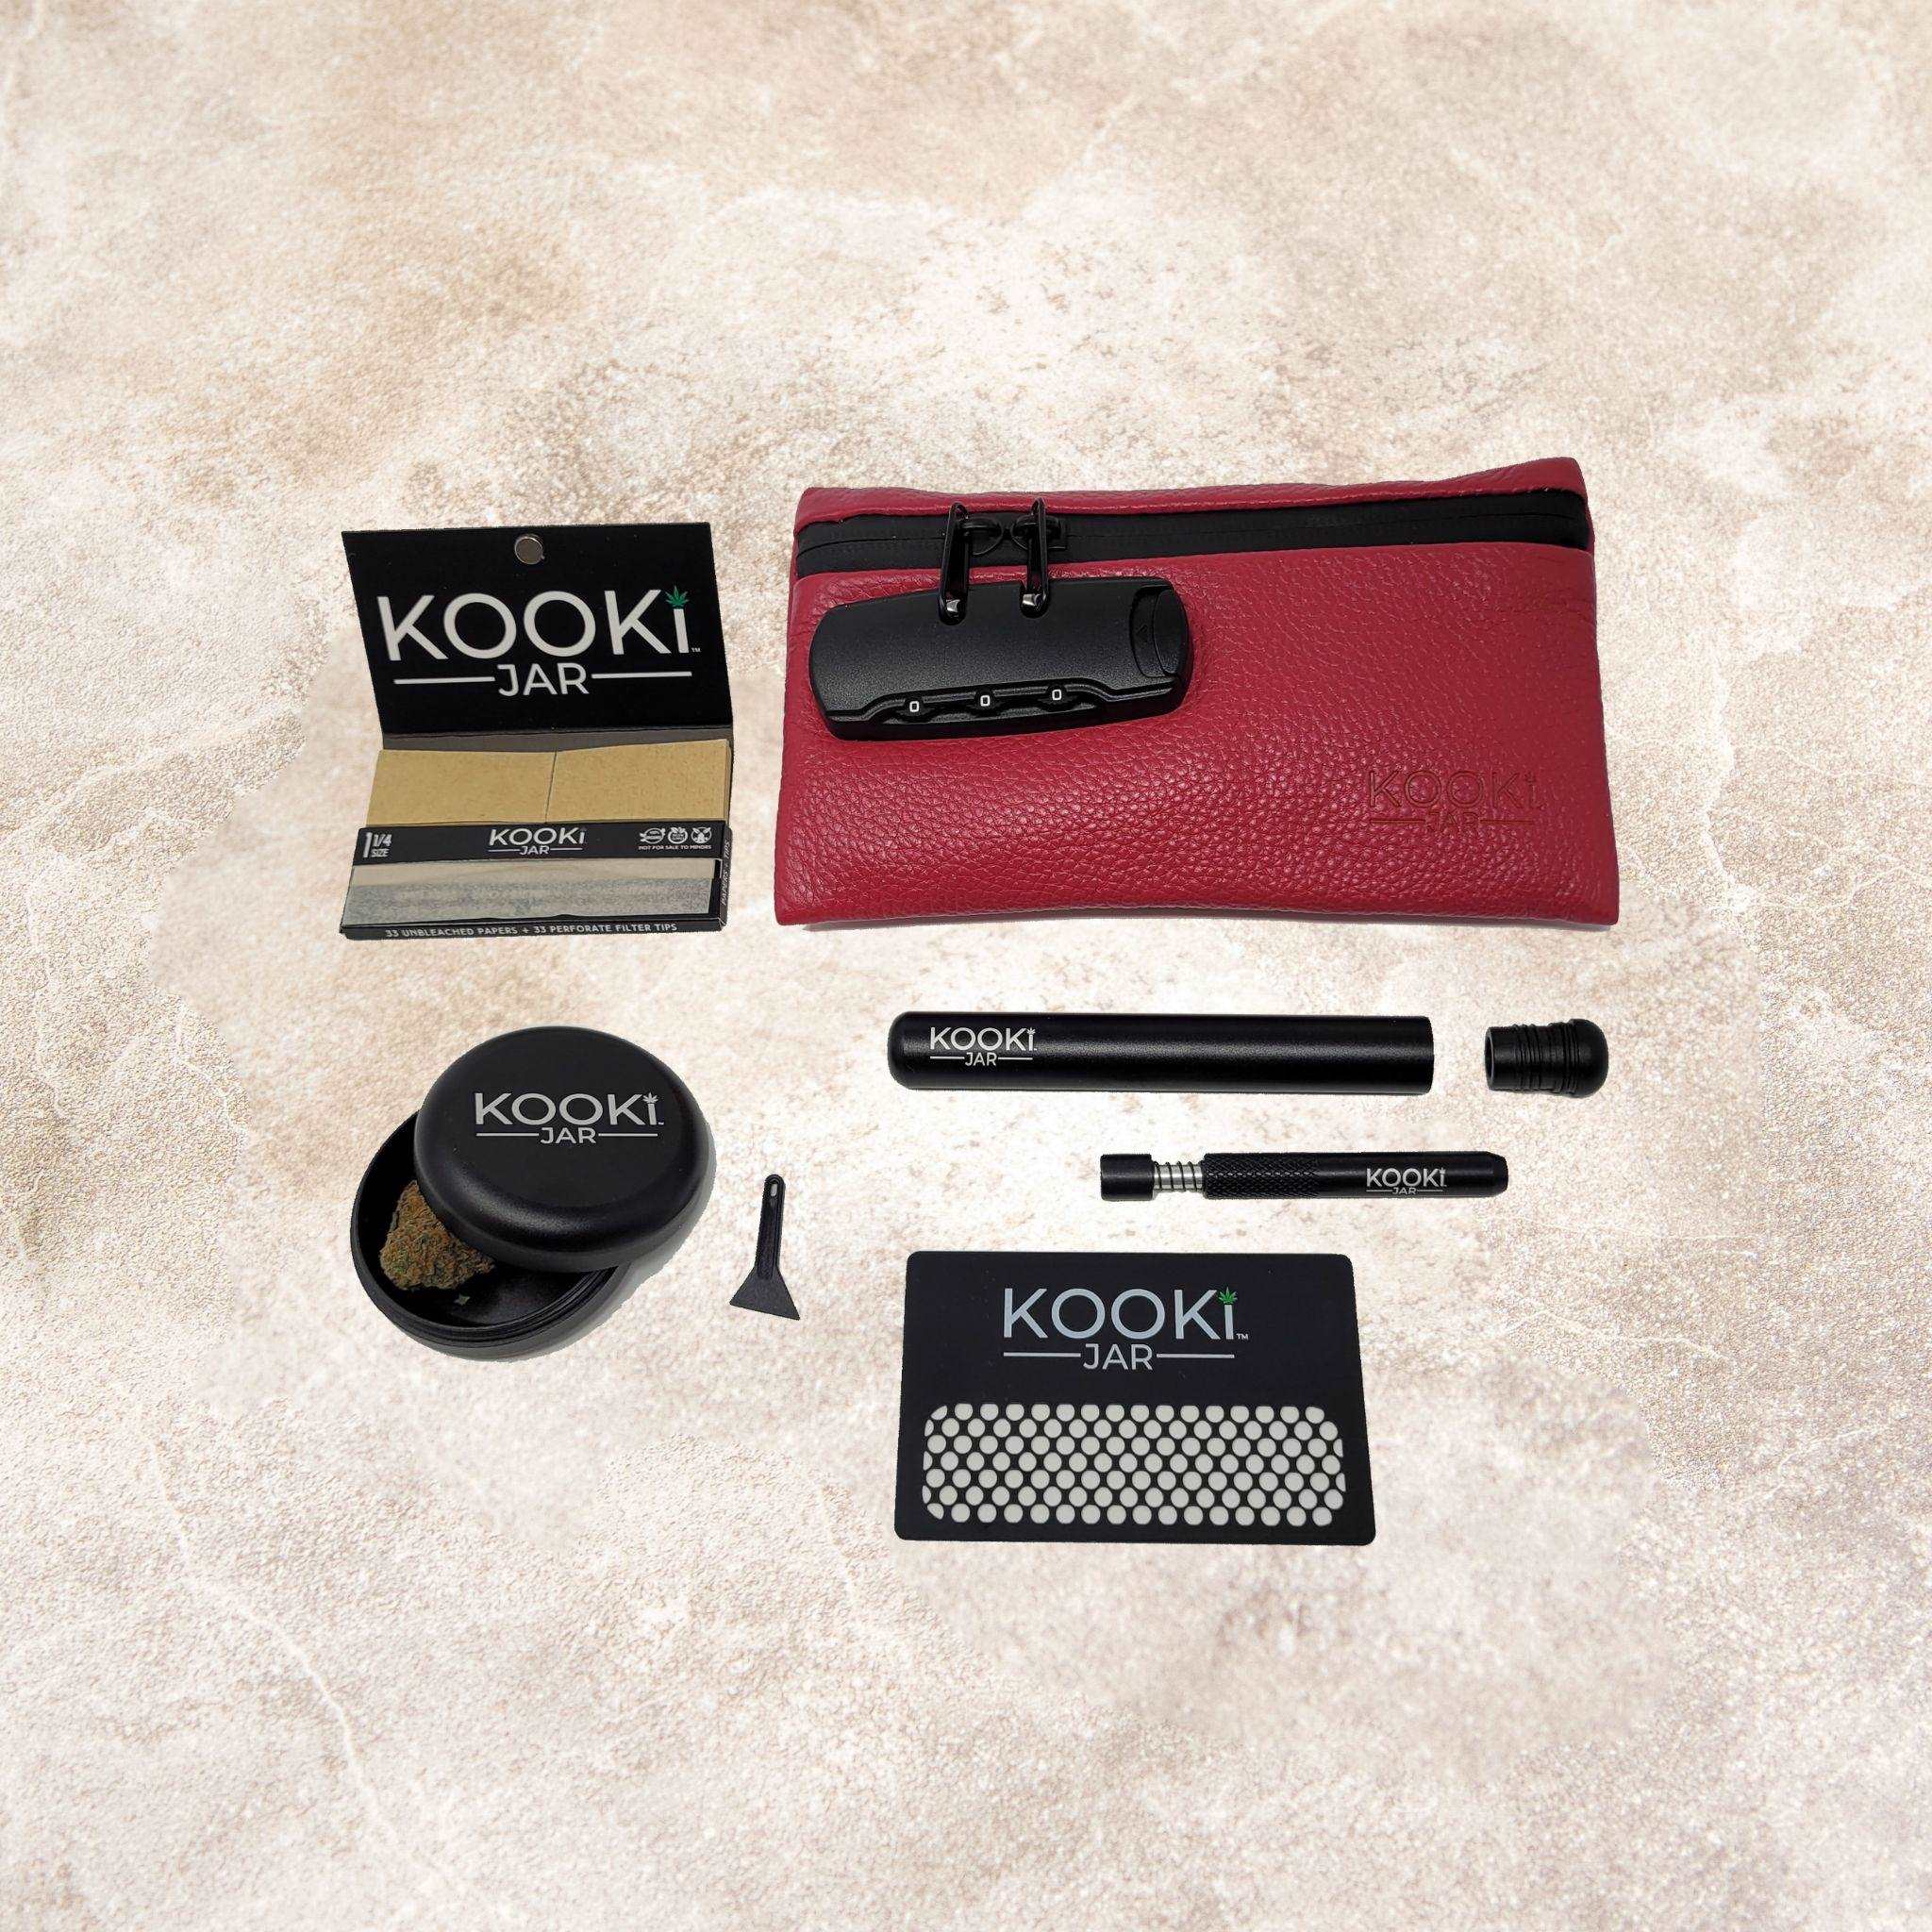 Odour-sealing, lockable leather On-The-Go kit has everything for the cannabis user on-the-move.